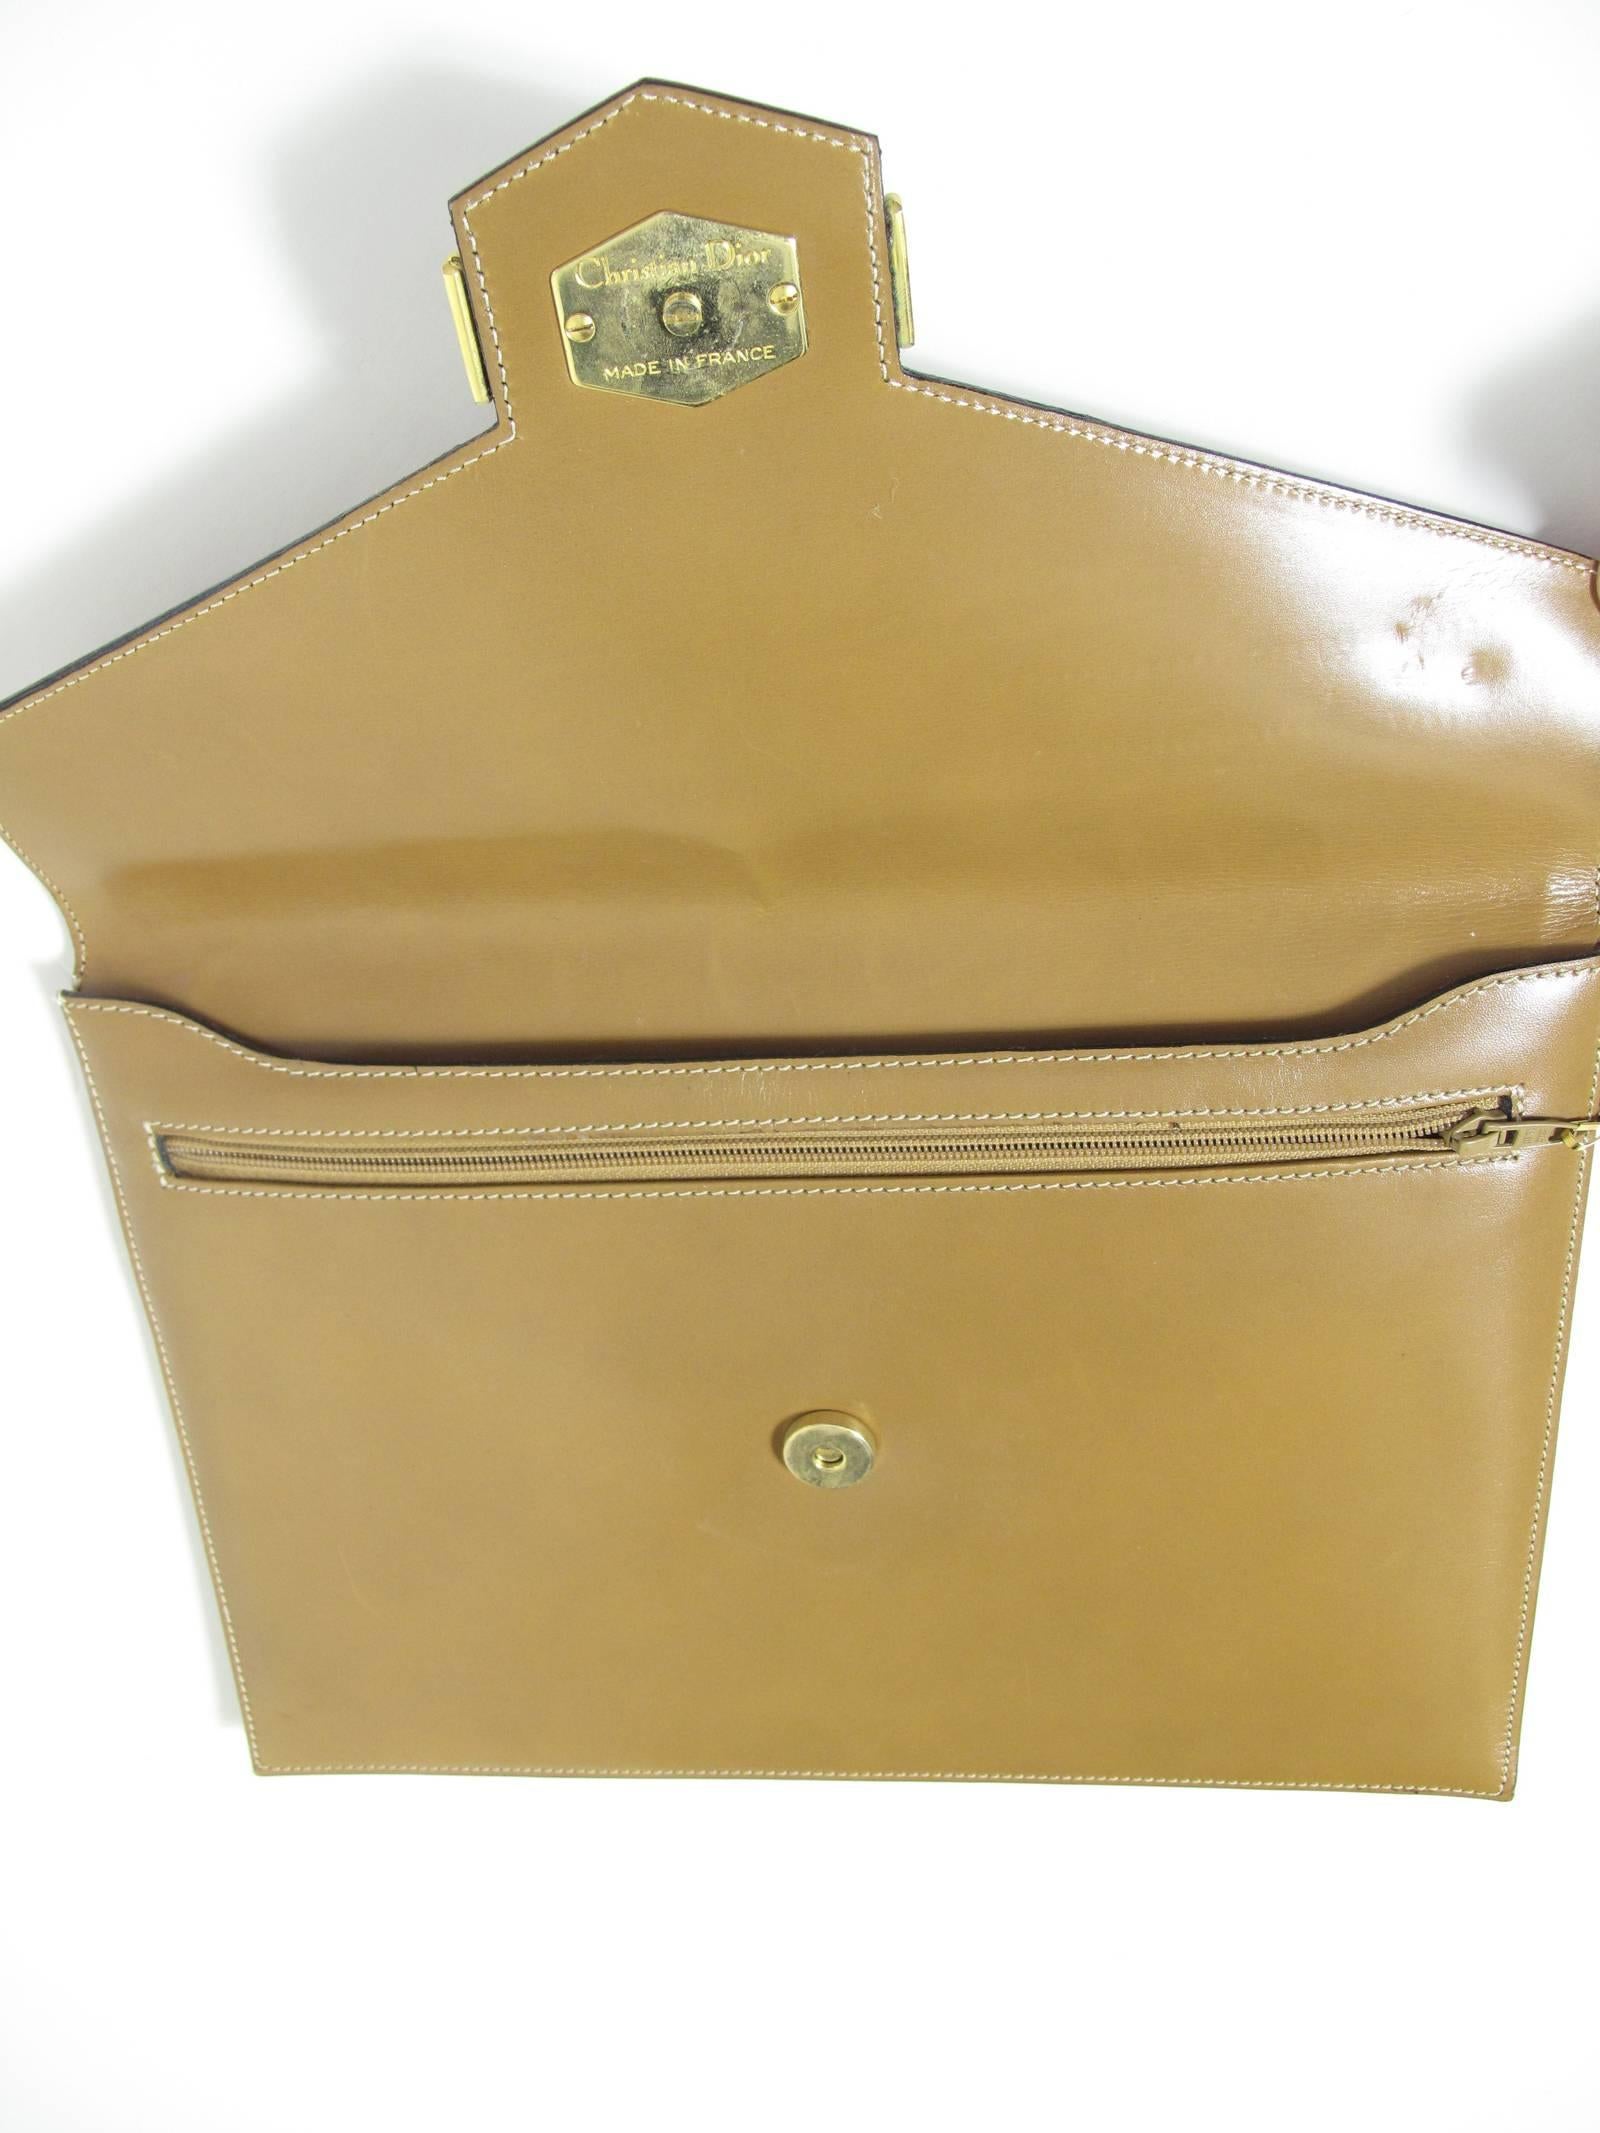 Christian Dior tan leather envelope clutch.  Condition: Excellent.  8 1/4